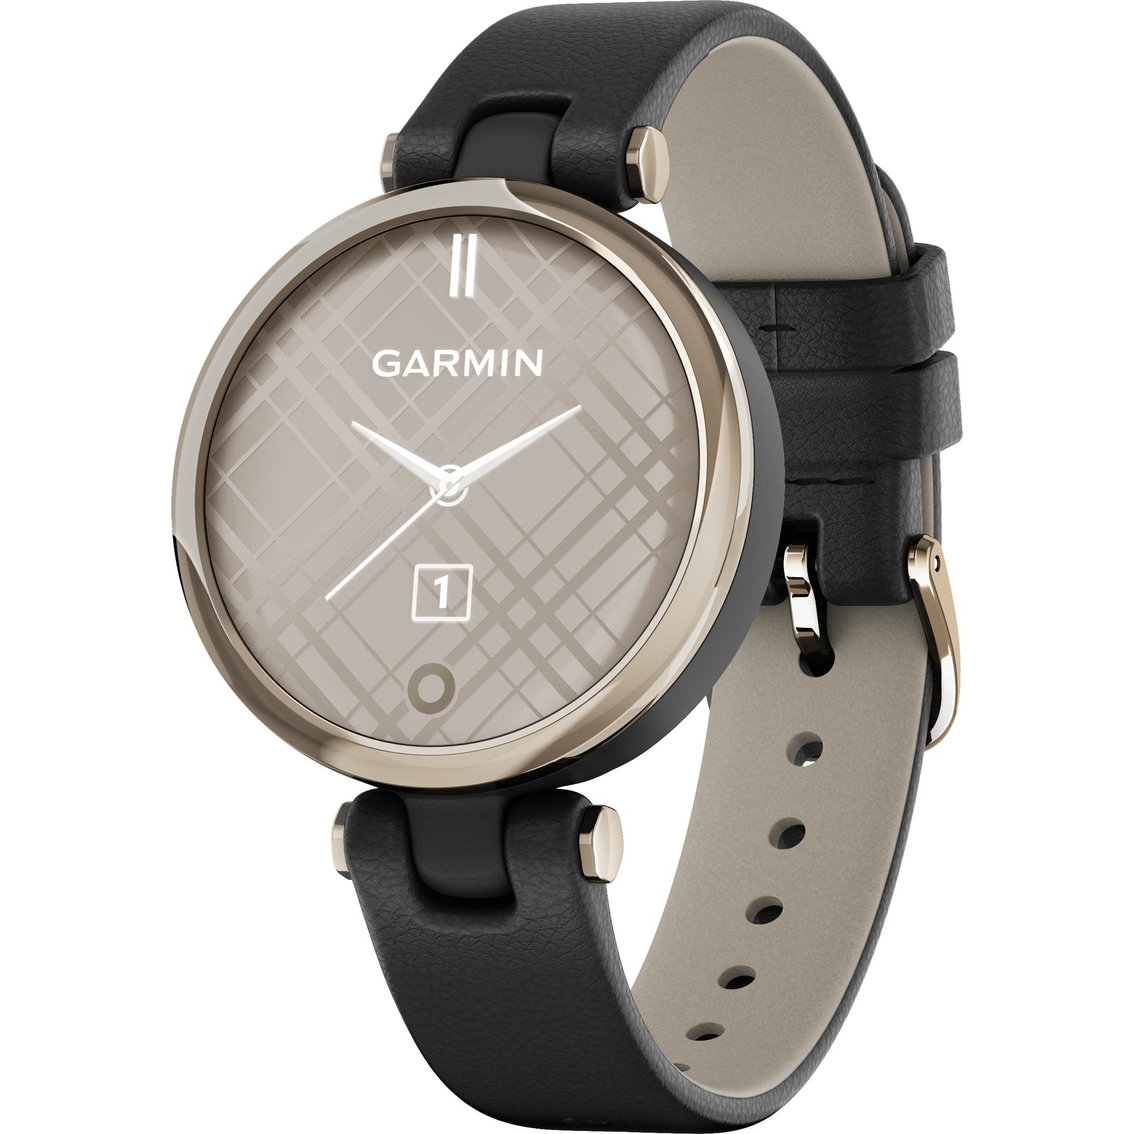 Garmin Lily Sports Edition Cream Gold Bezel White Case Leather Band Smartwatch - Image 3 of 4